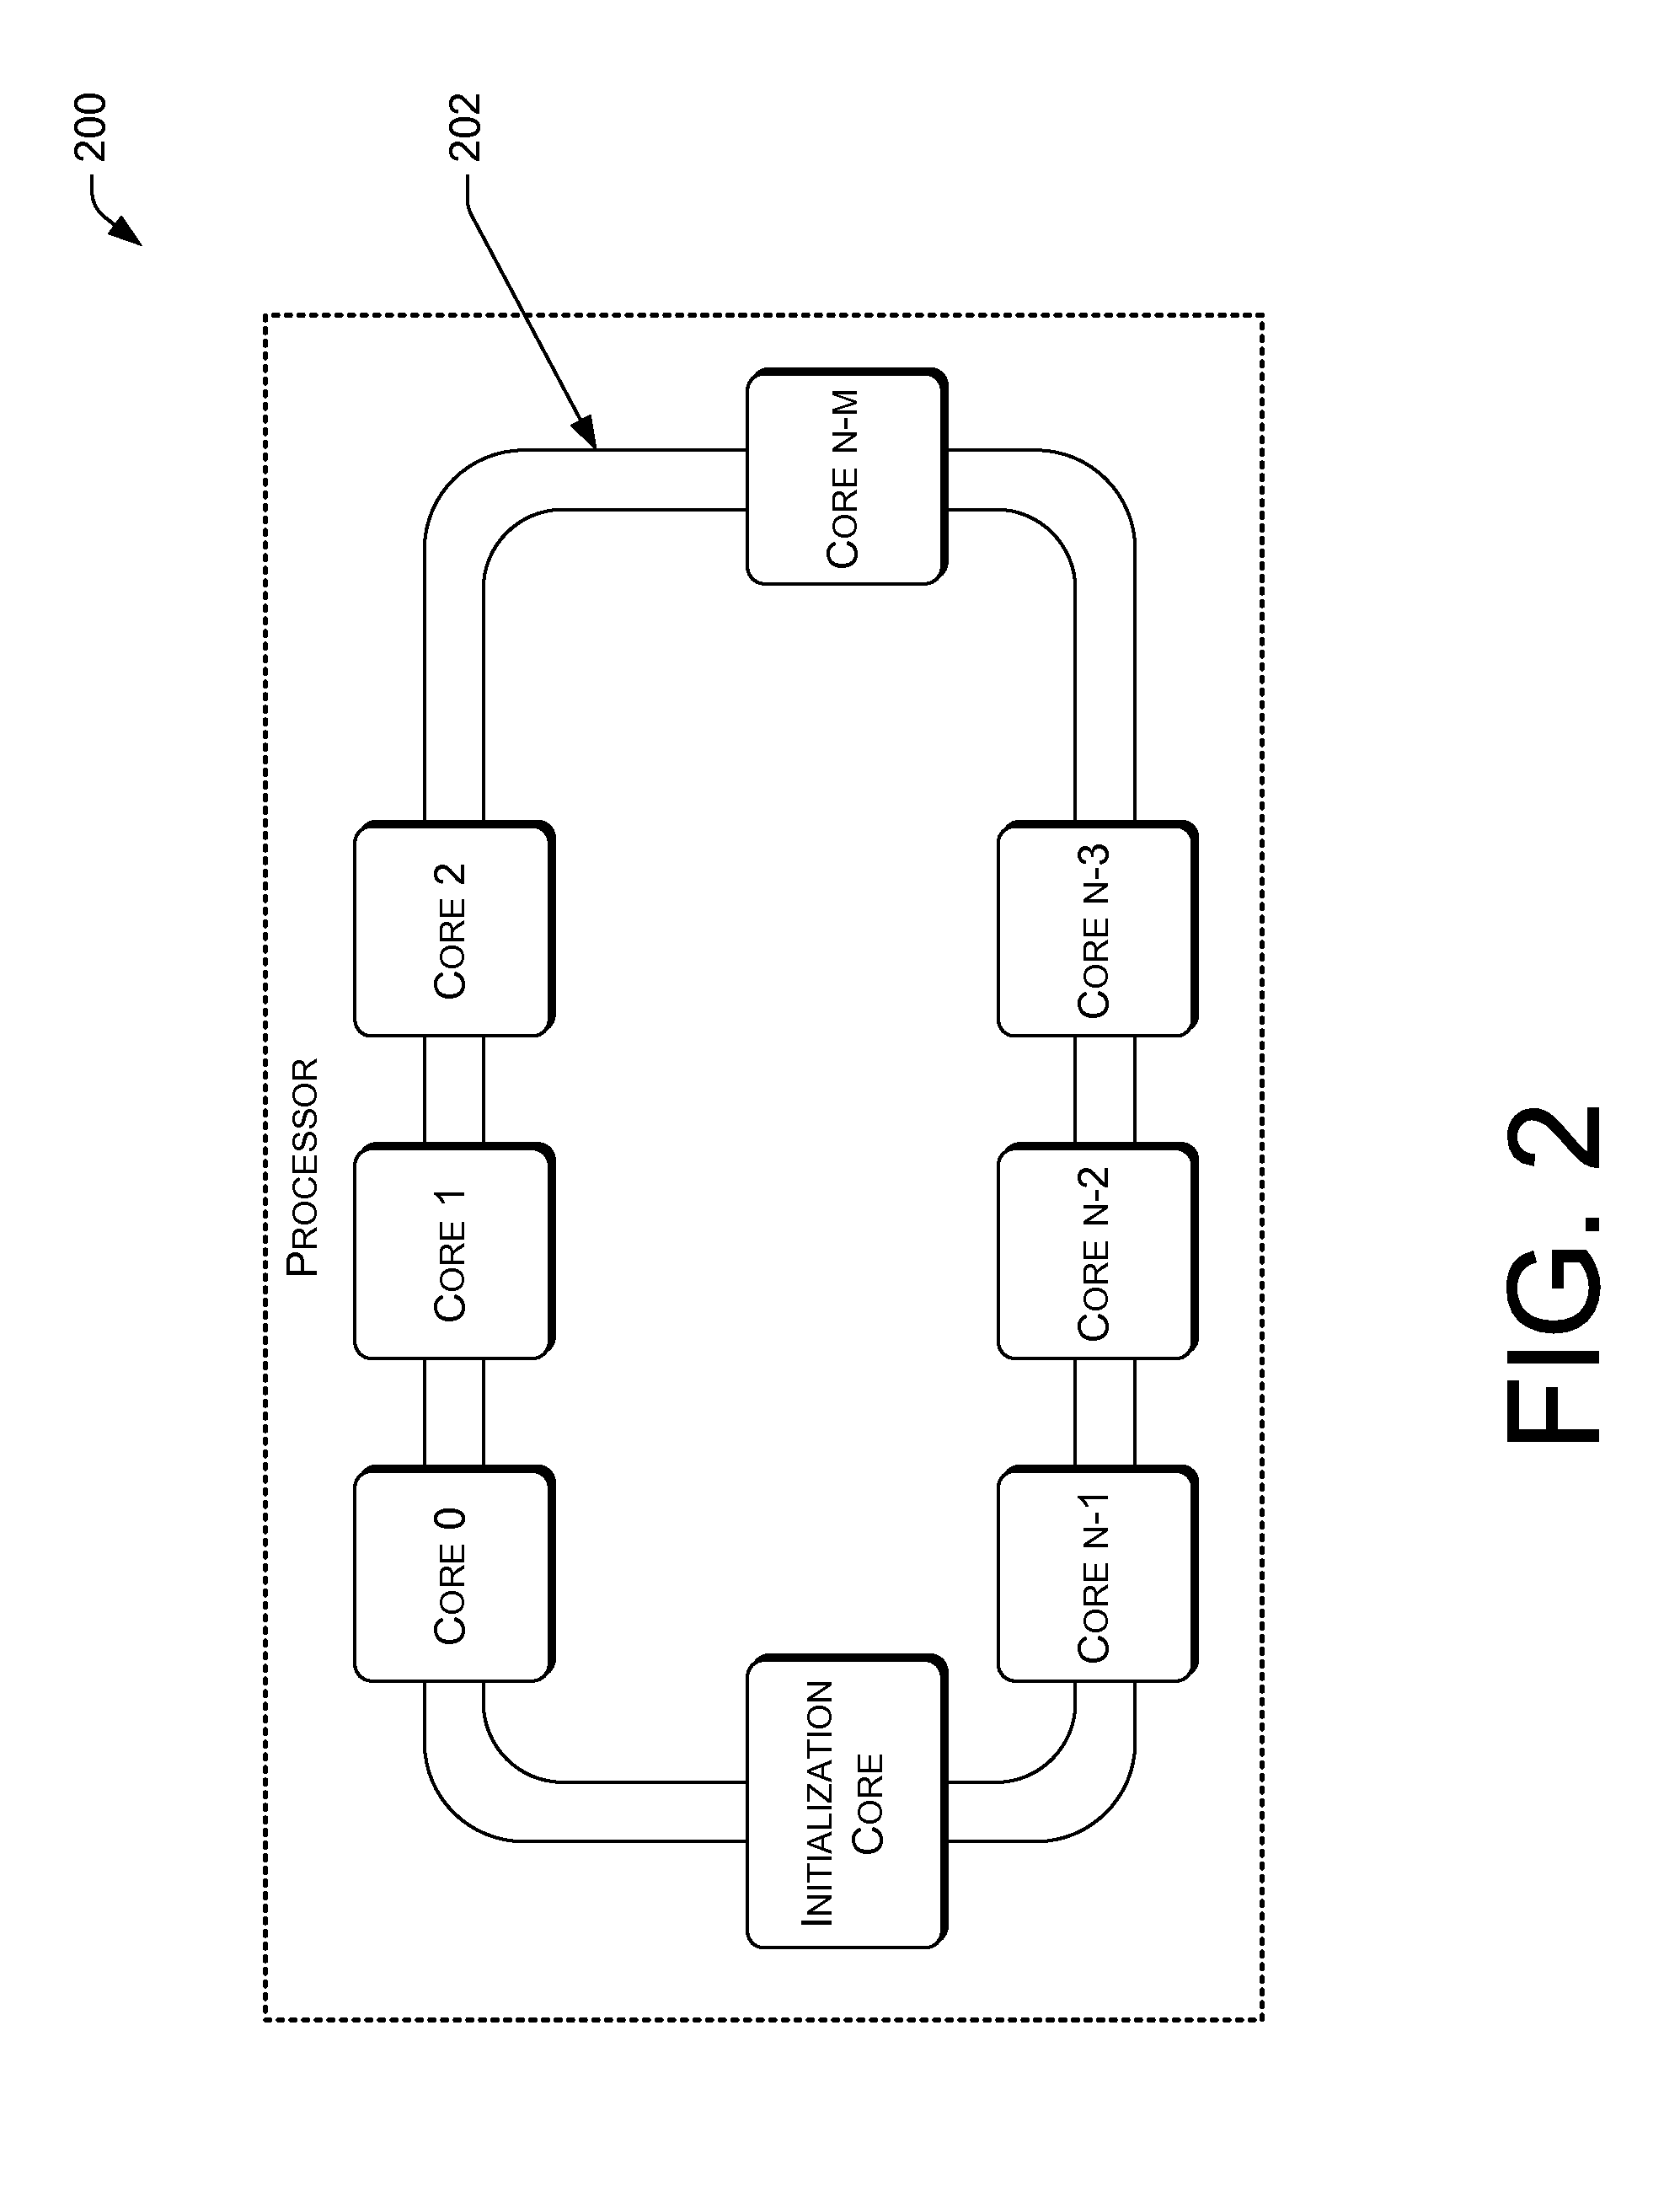 Advanced programmable interrupt controller identifier (APIC id) assignment for a multi-core processing unit